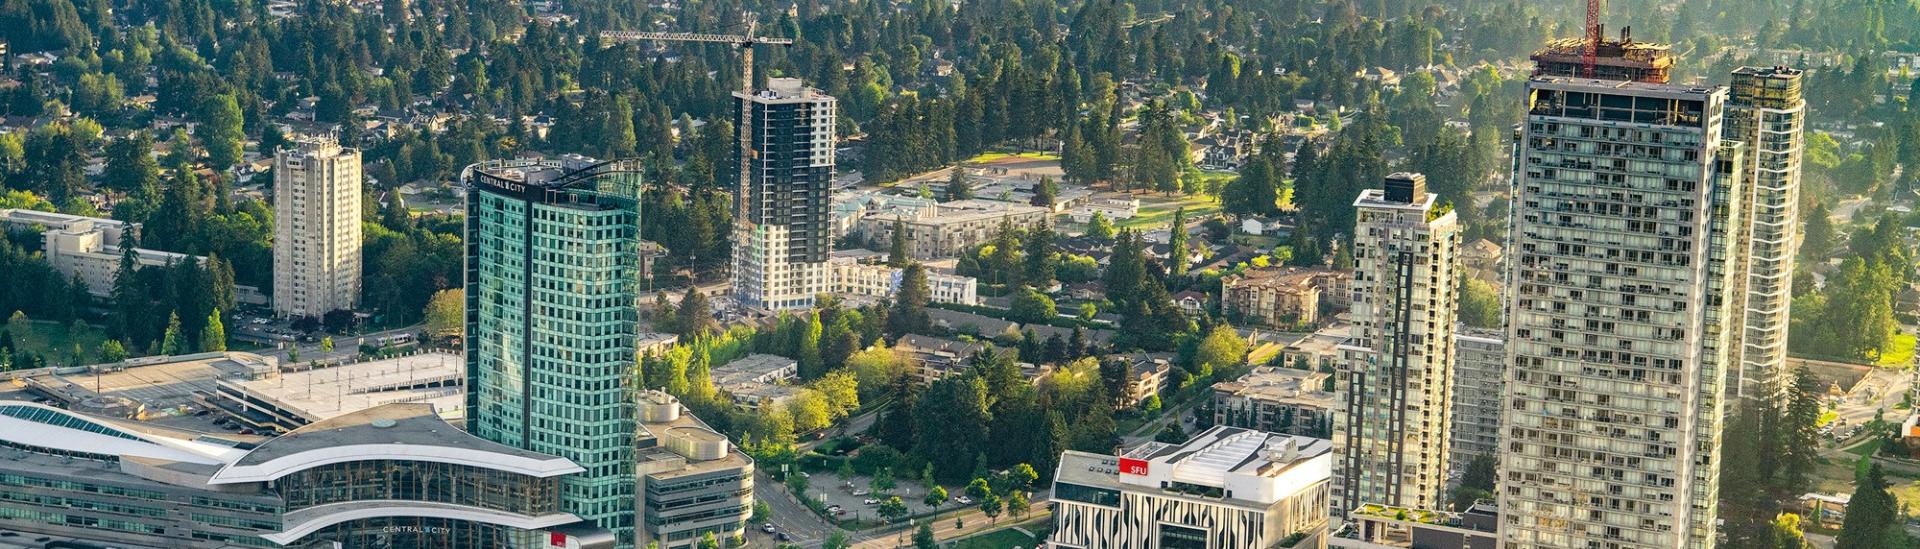 image of SFU amidst downtown buildings in surrey 